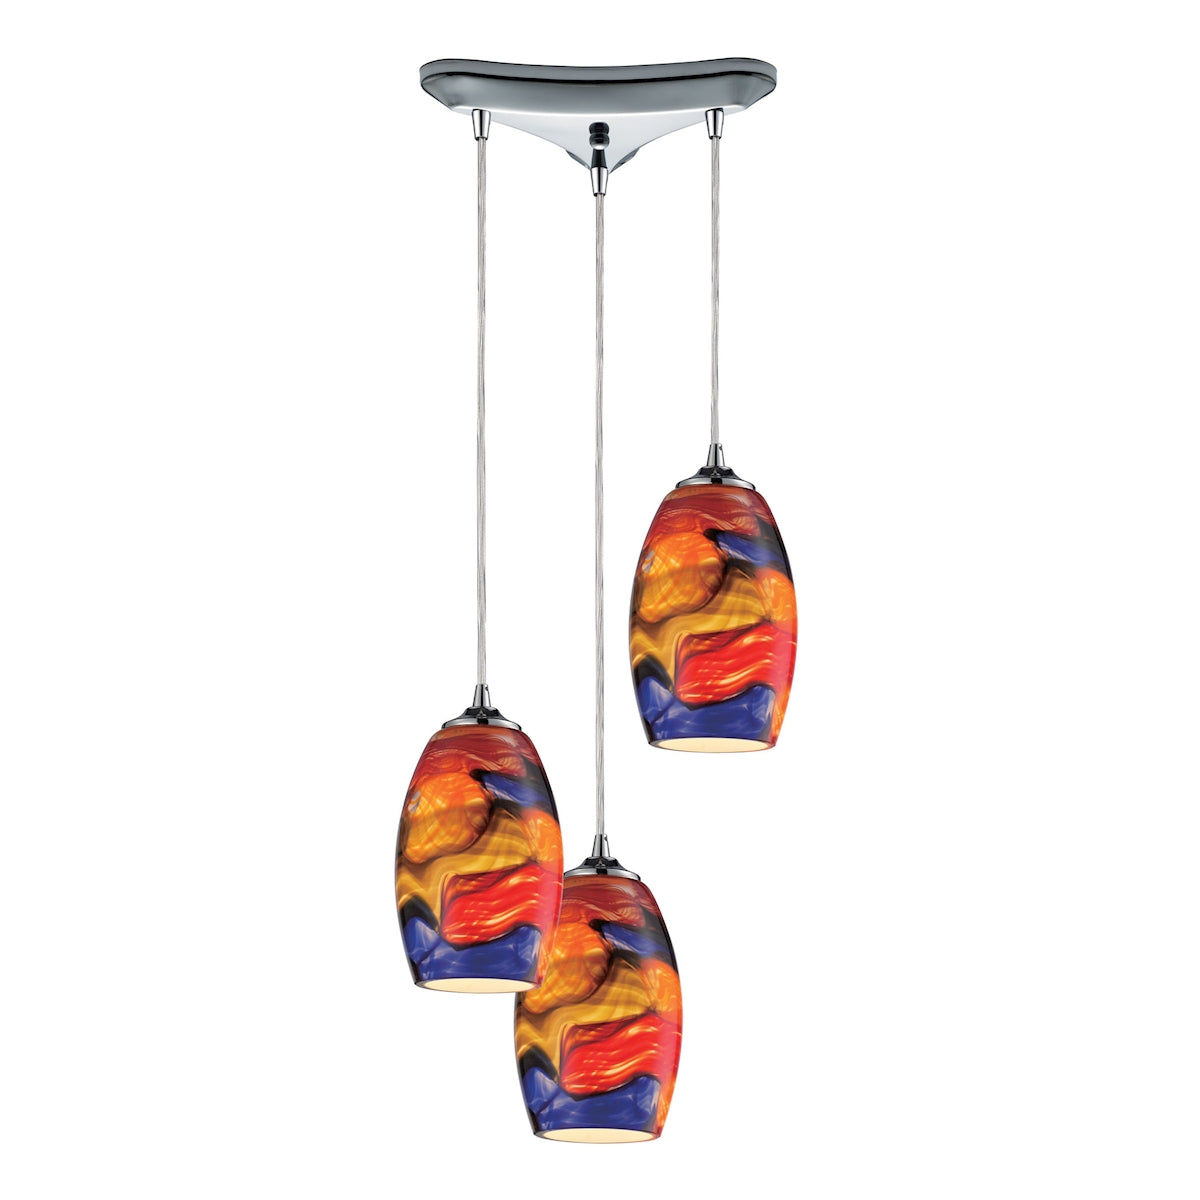 ELK Lighting 31339/3 Surrealist 3-Light Triangular Pendant Fixture in Polished Chrome with Multi-colored Glass